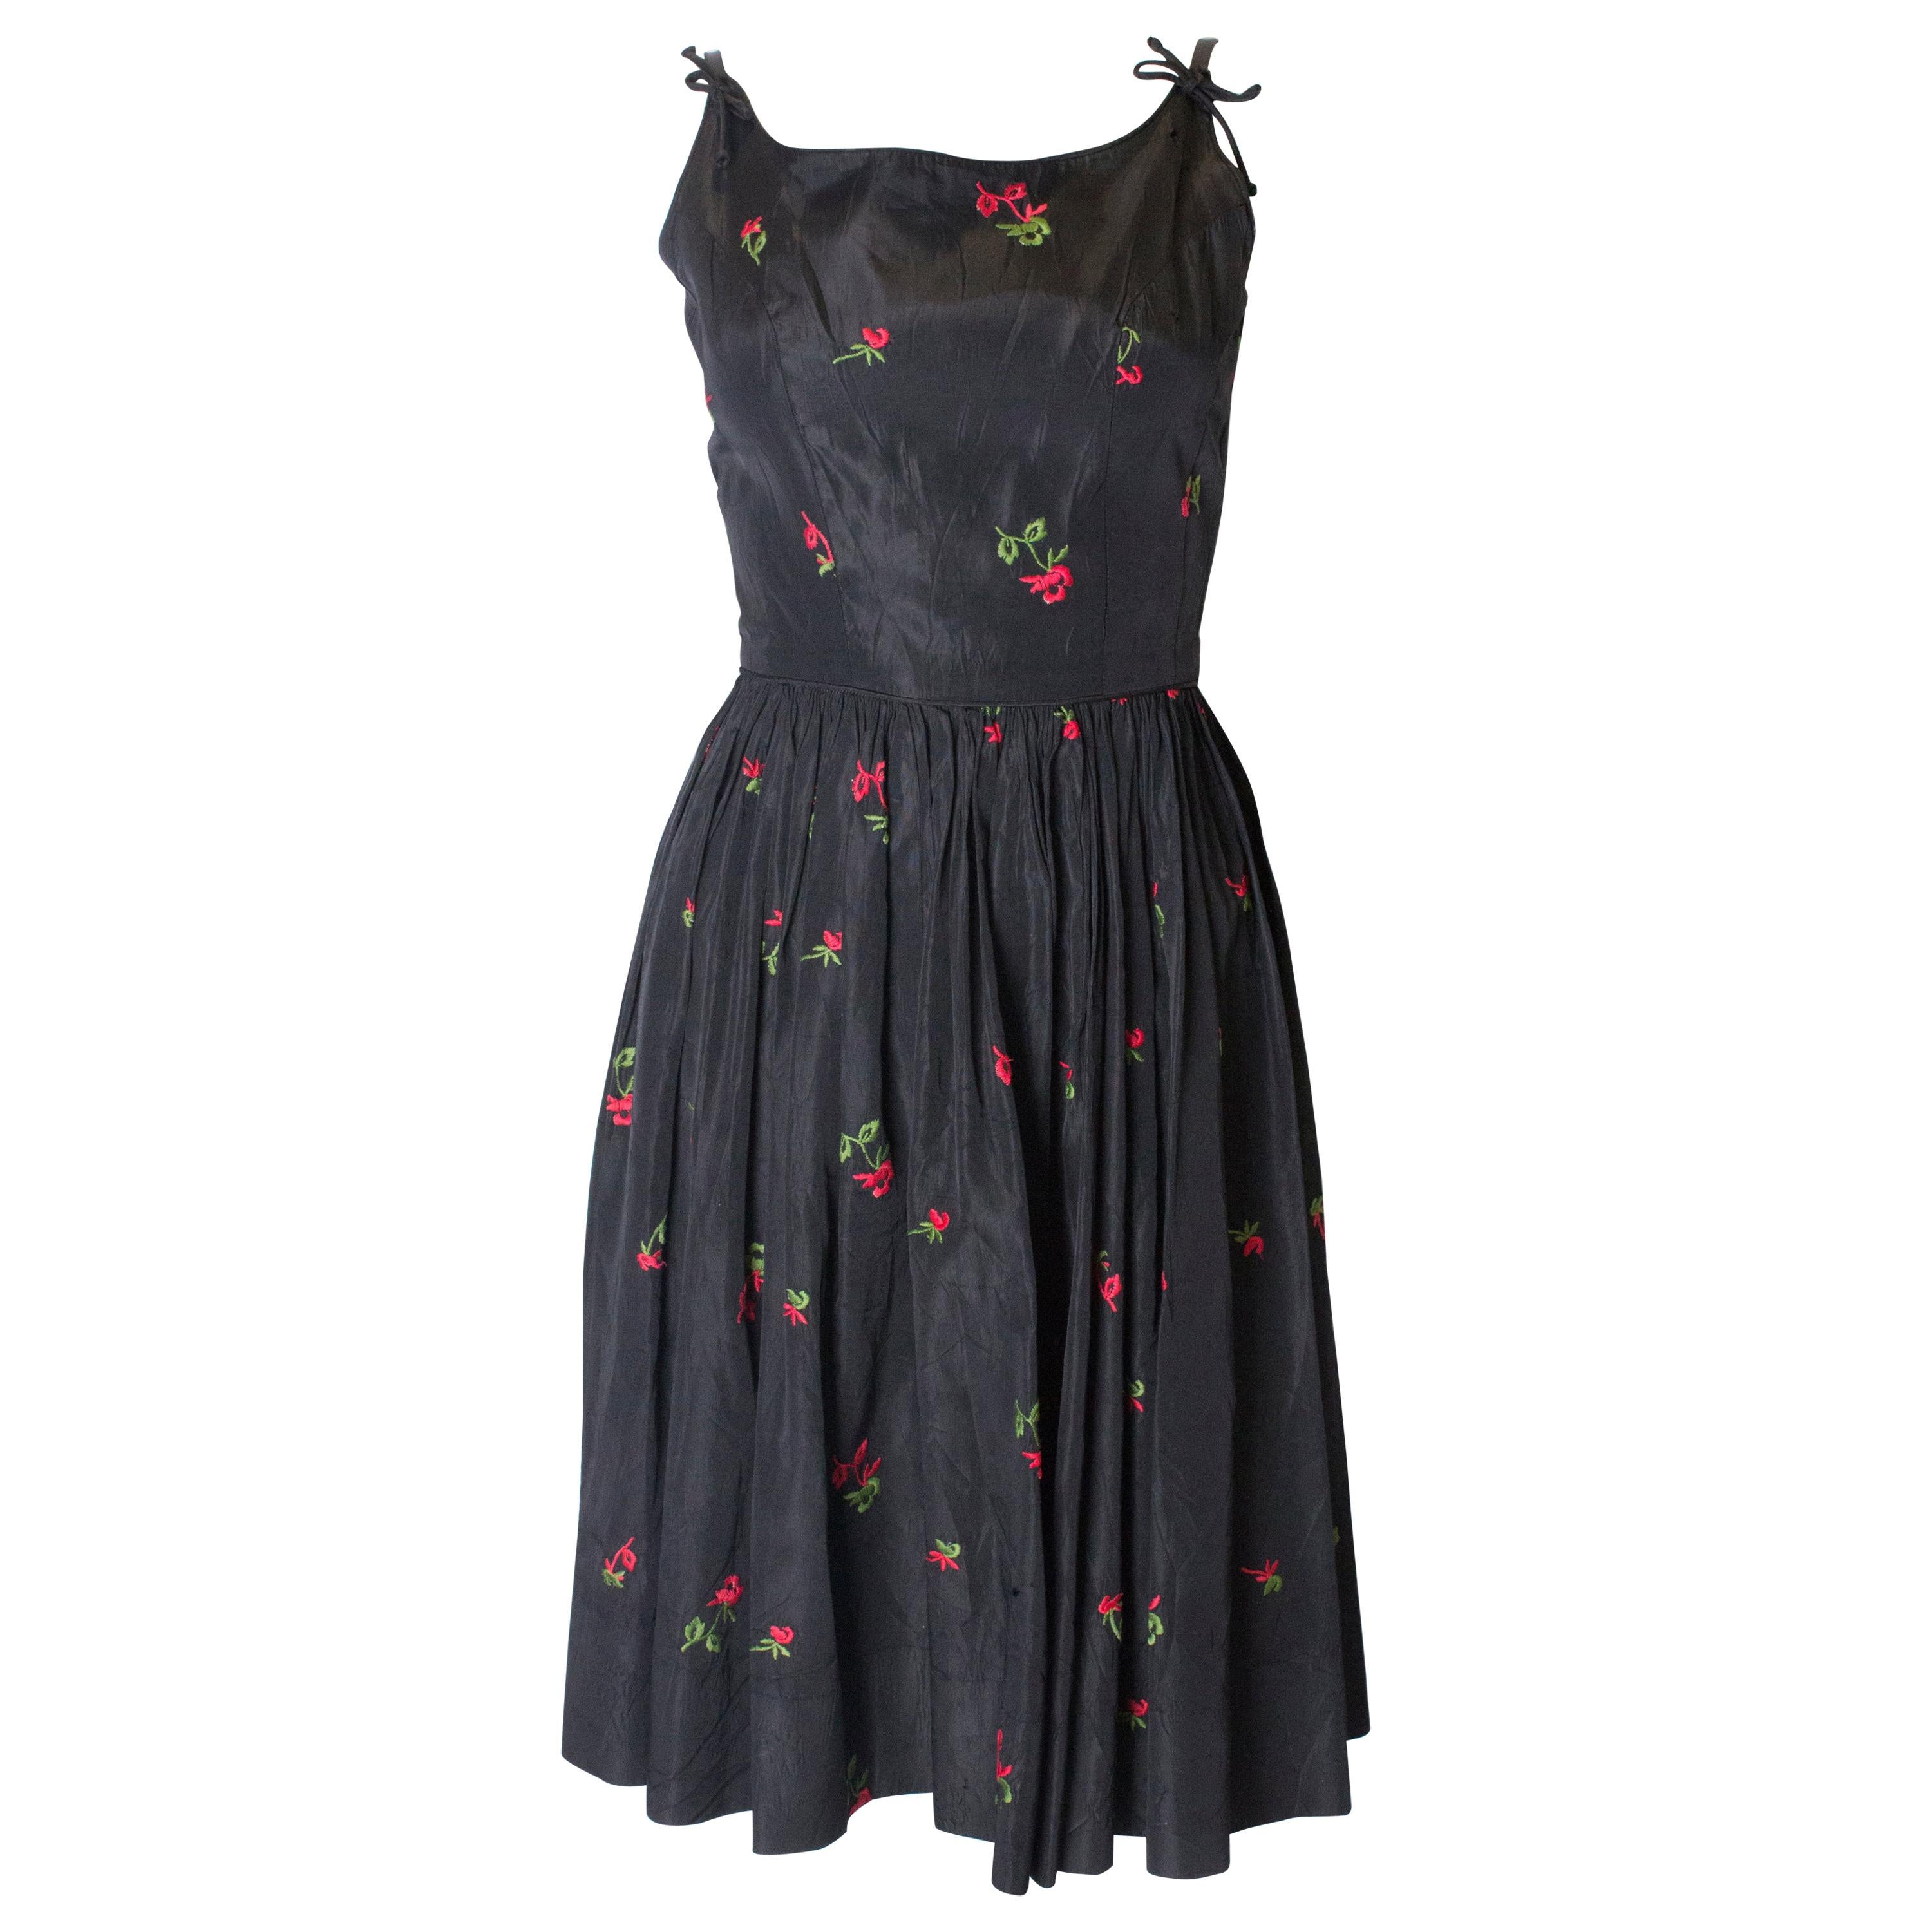 A vintage 1950s black cinch swing dress with embroidered flowers 